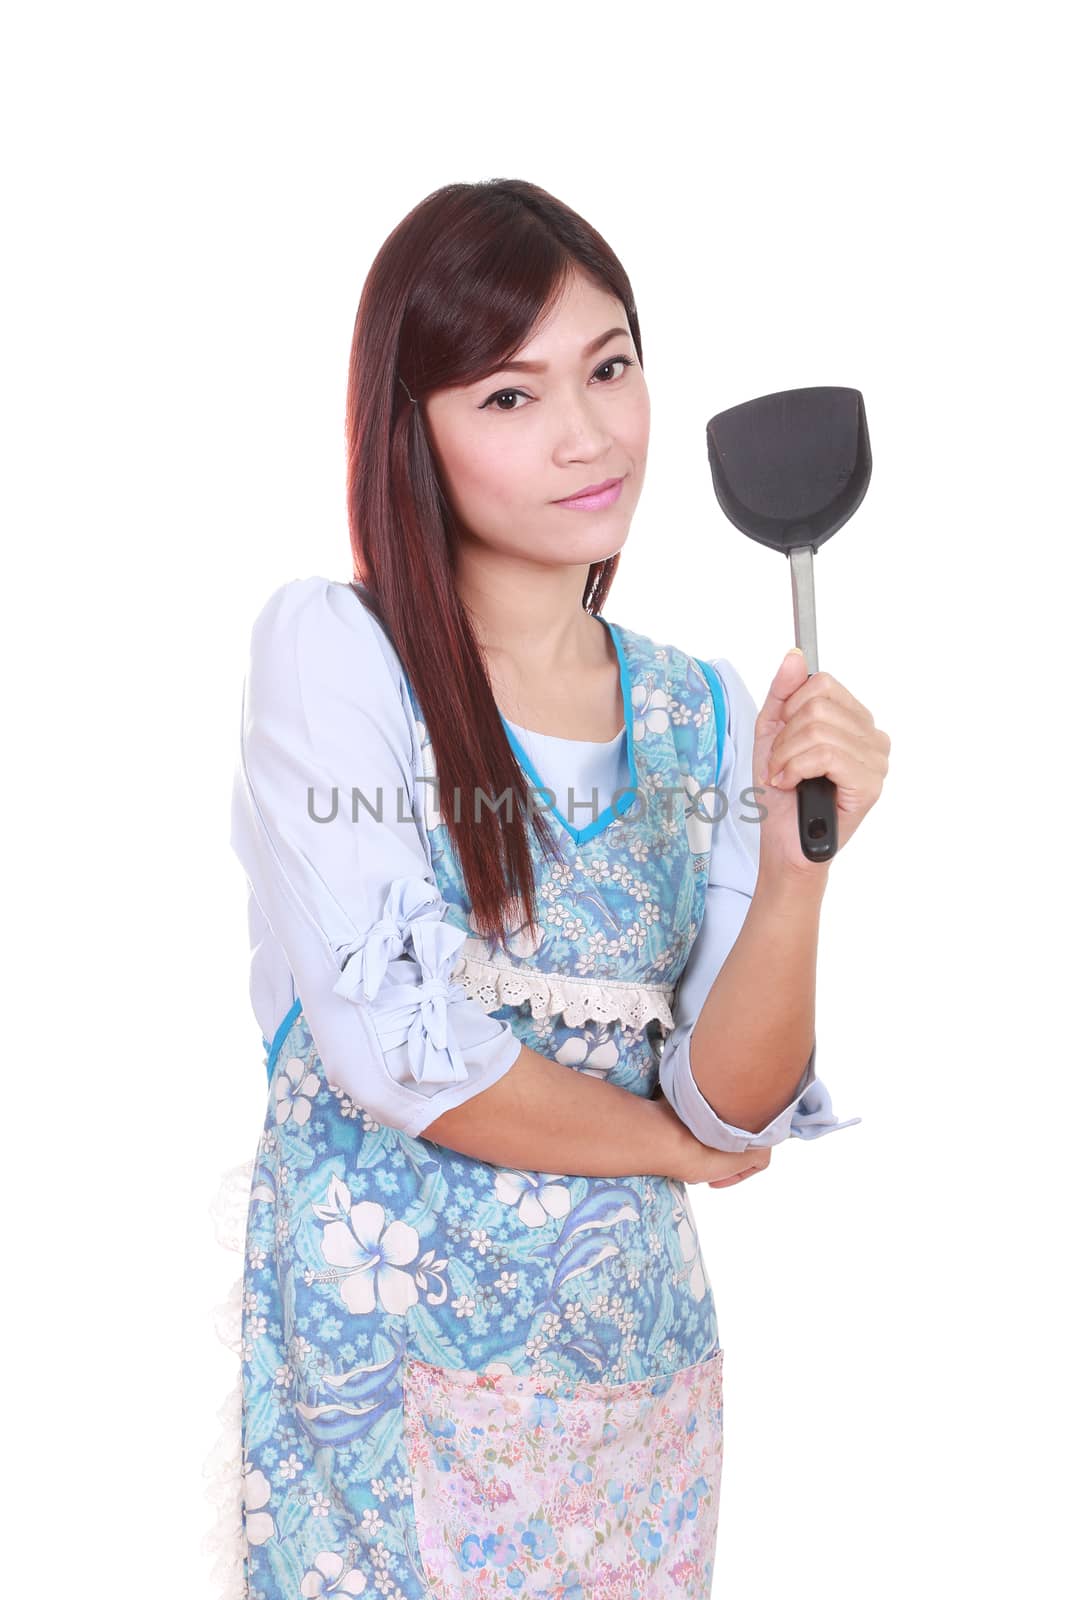 female chef with spade of frying pan by geargodz